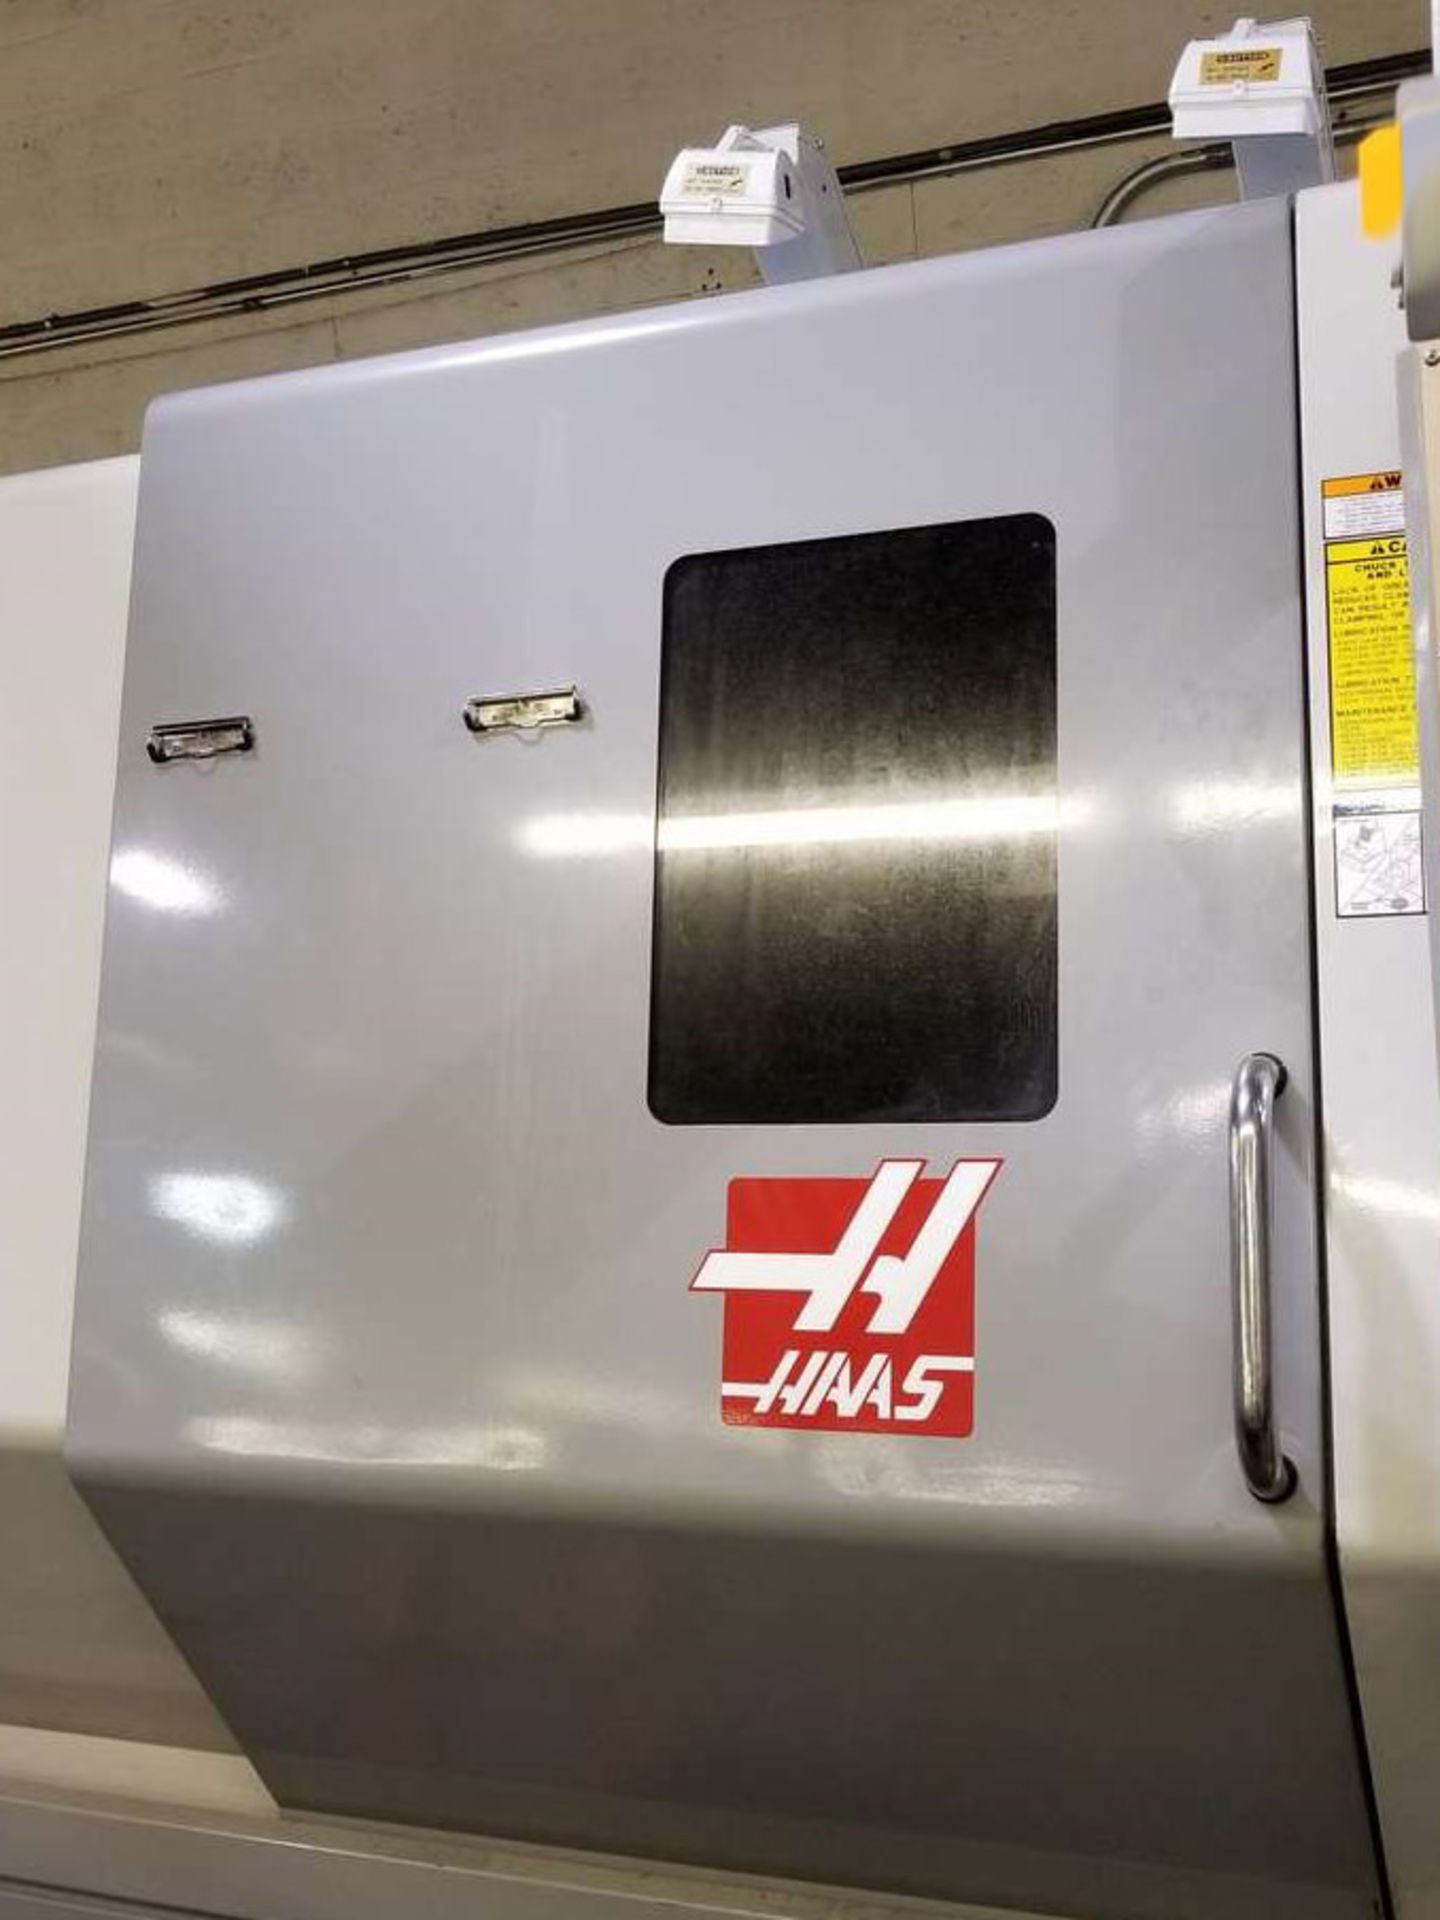 HAAS SL-40T CNC Turning Center - Image 11 of 15